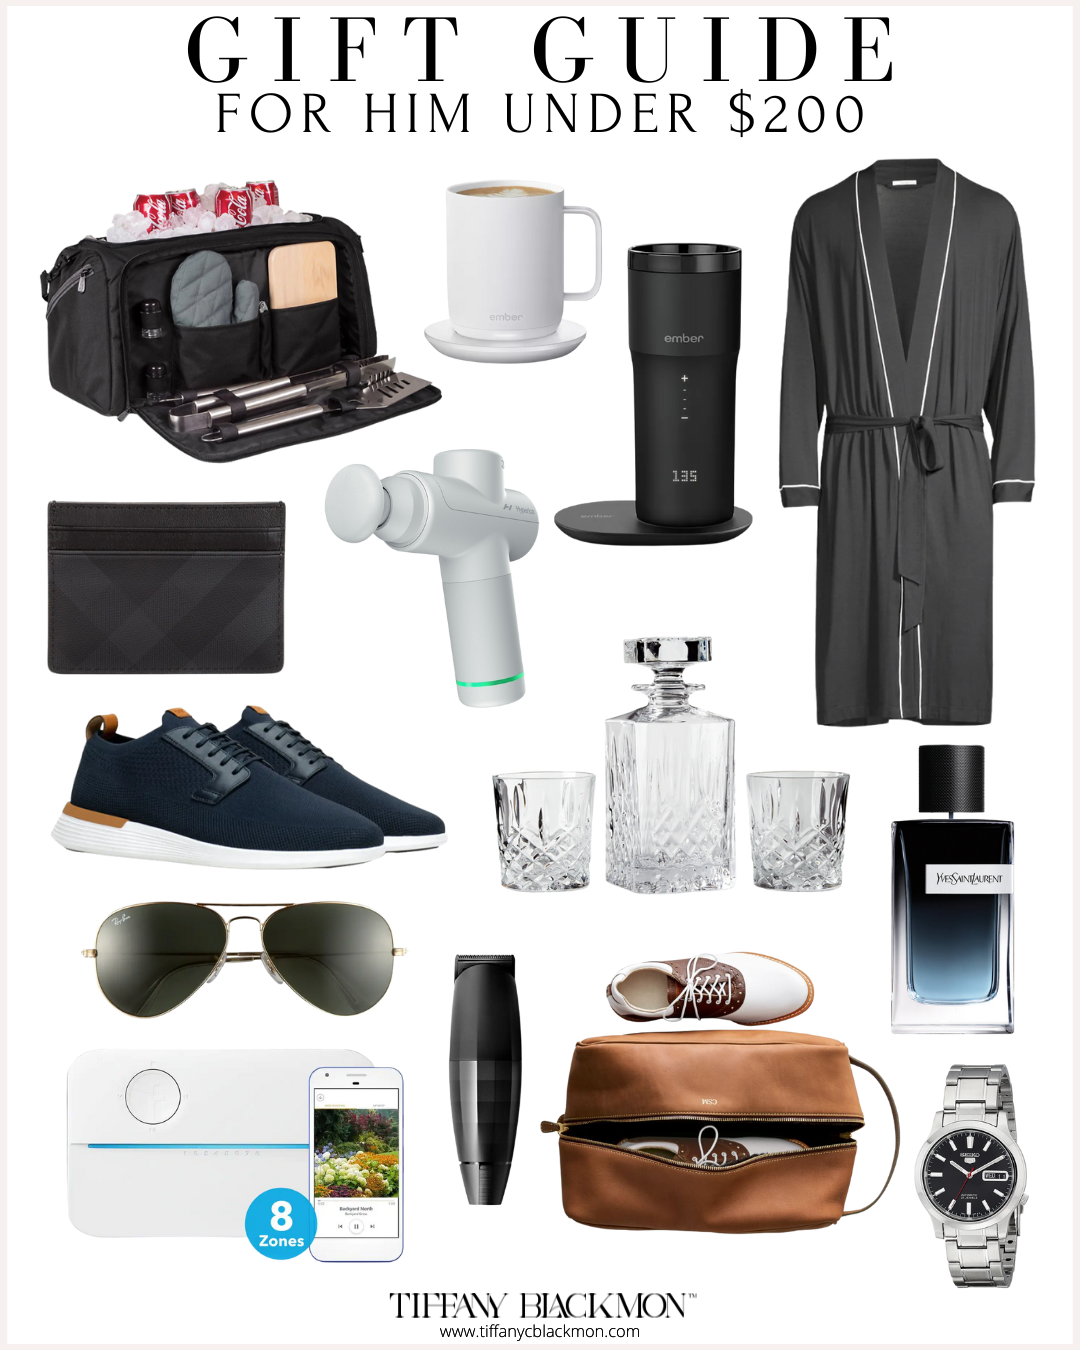 Gift Guides For Him, Gift Guide Ideas, Men Gifts, Under $50, Under $100, Under $200, Luxury Gifts for Him, Christmas Gift Ideas, Gifting Ideas, 